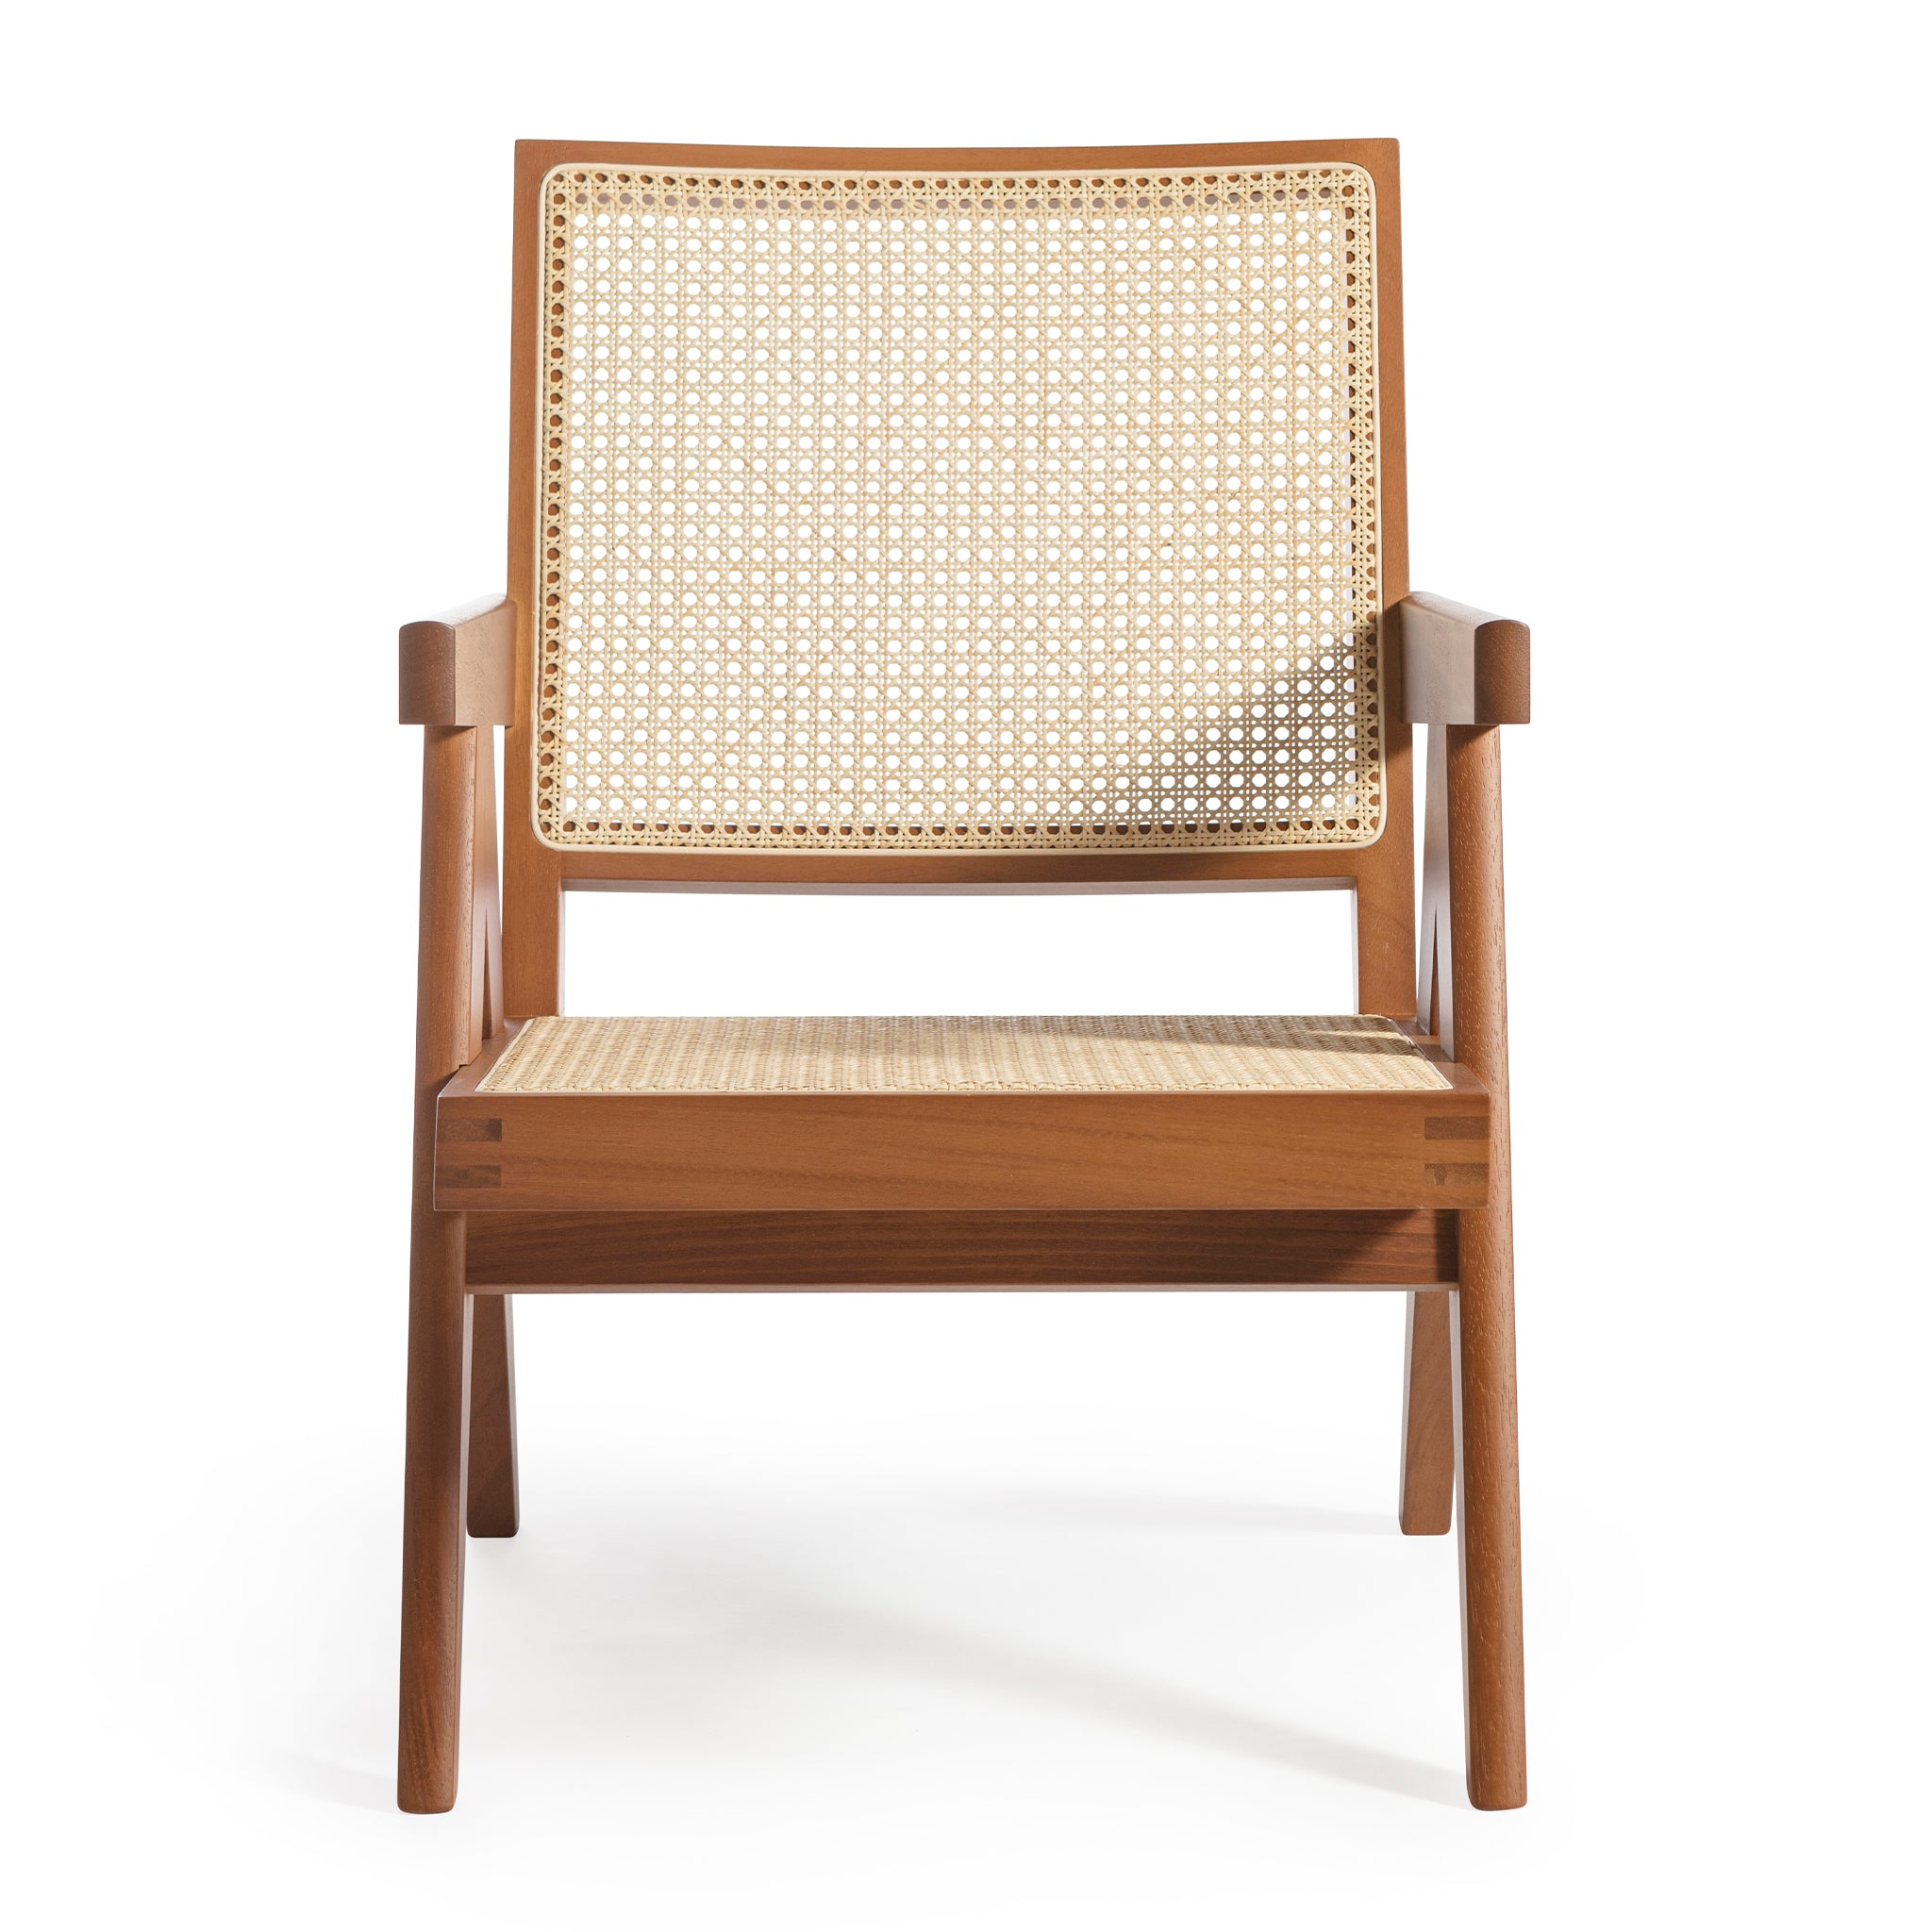 Front view of an authentic chandigarh living room chair with a teak frame, viennese cane, pierre jeanneret era, produced by Klarel #K36-1